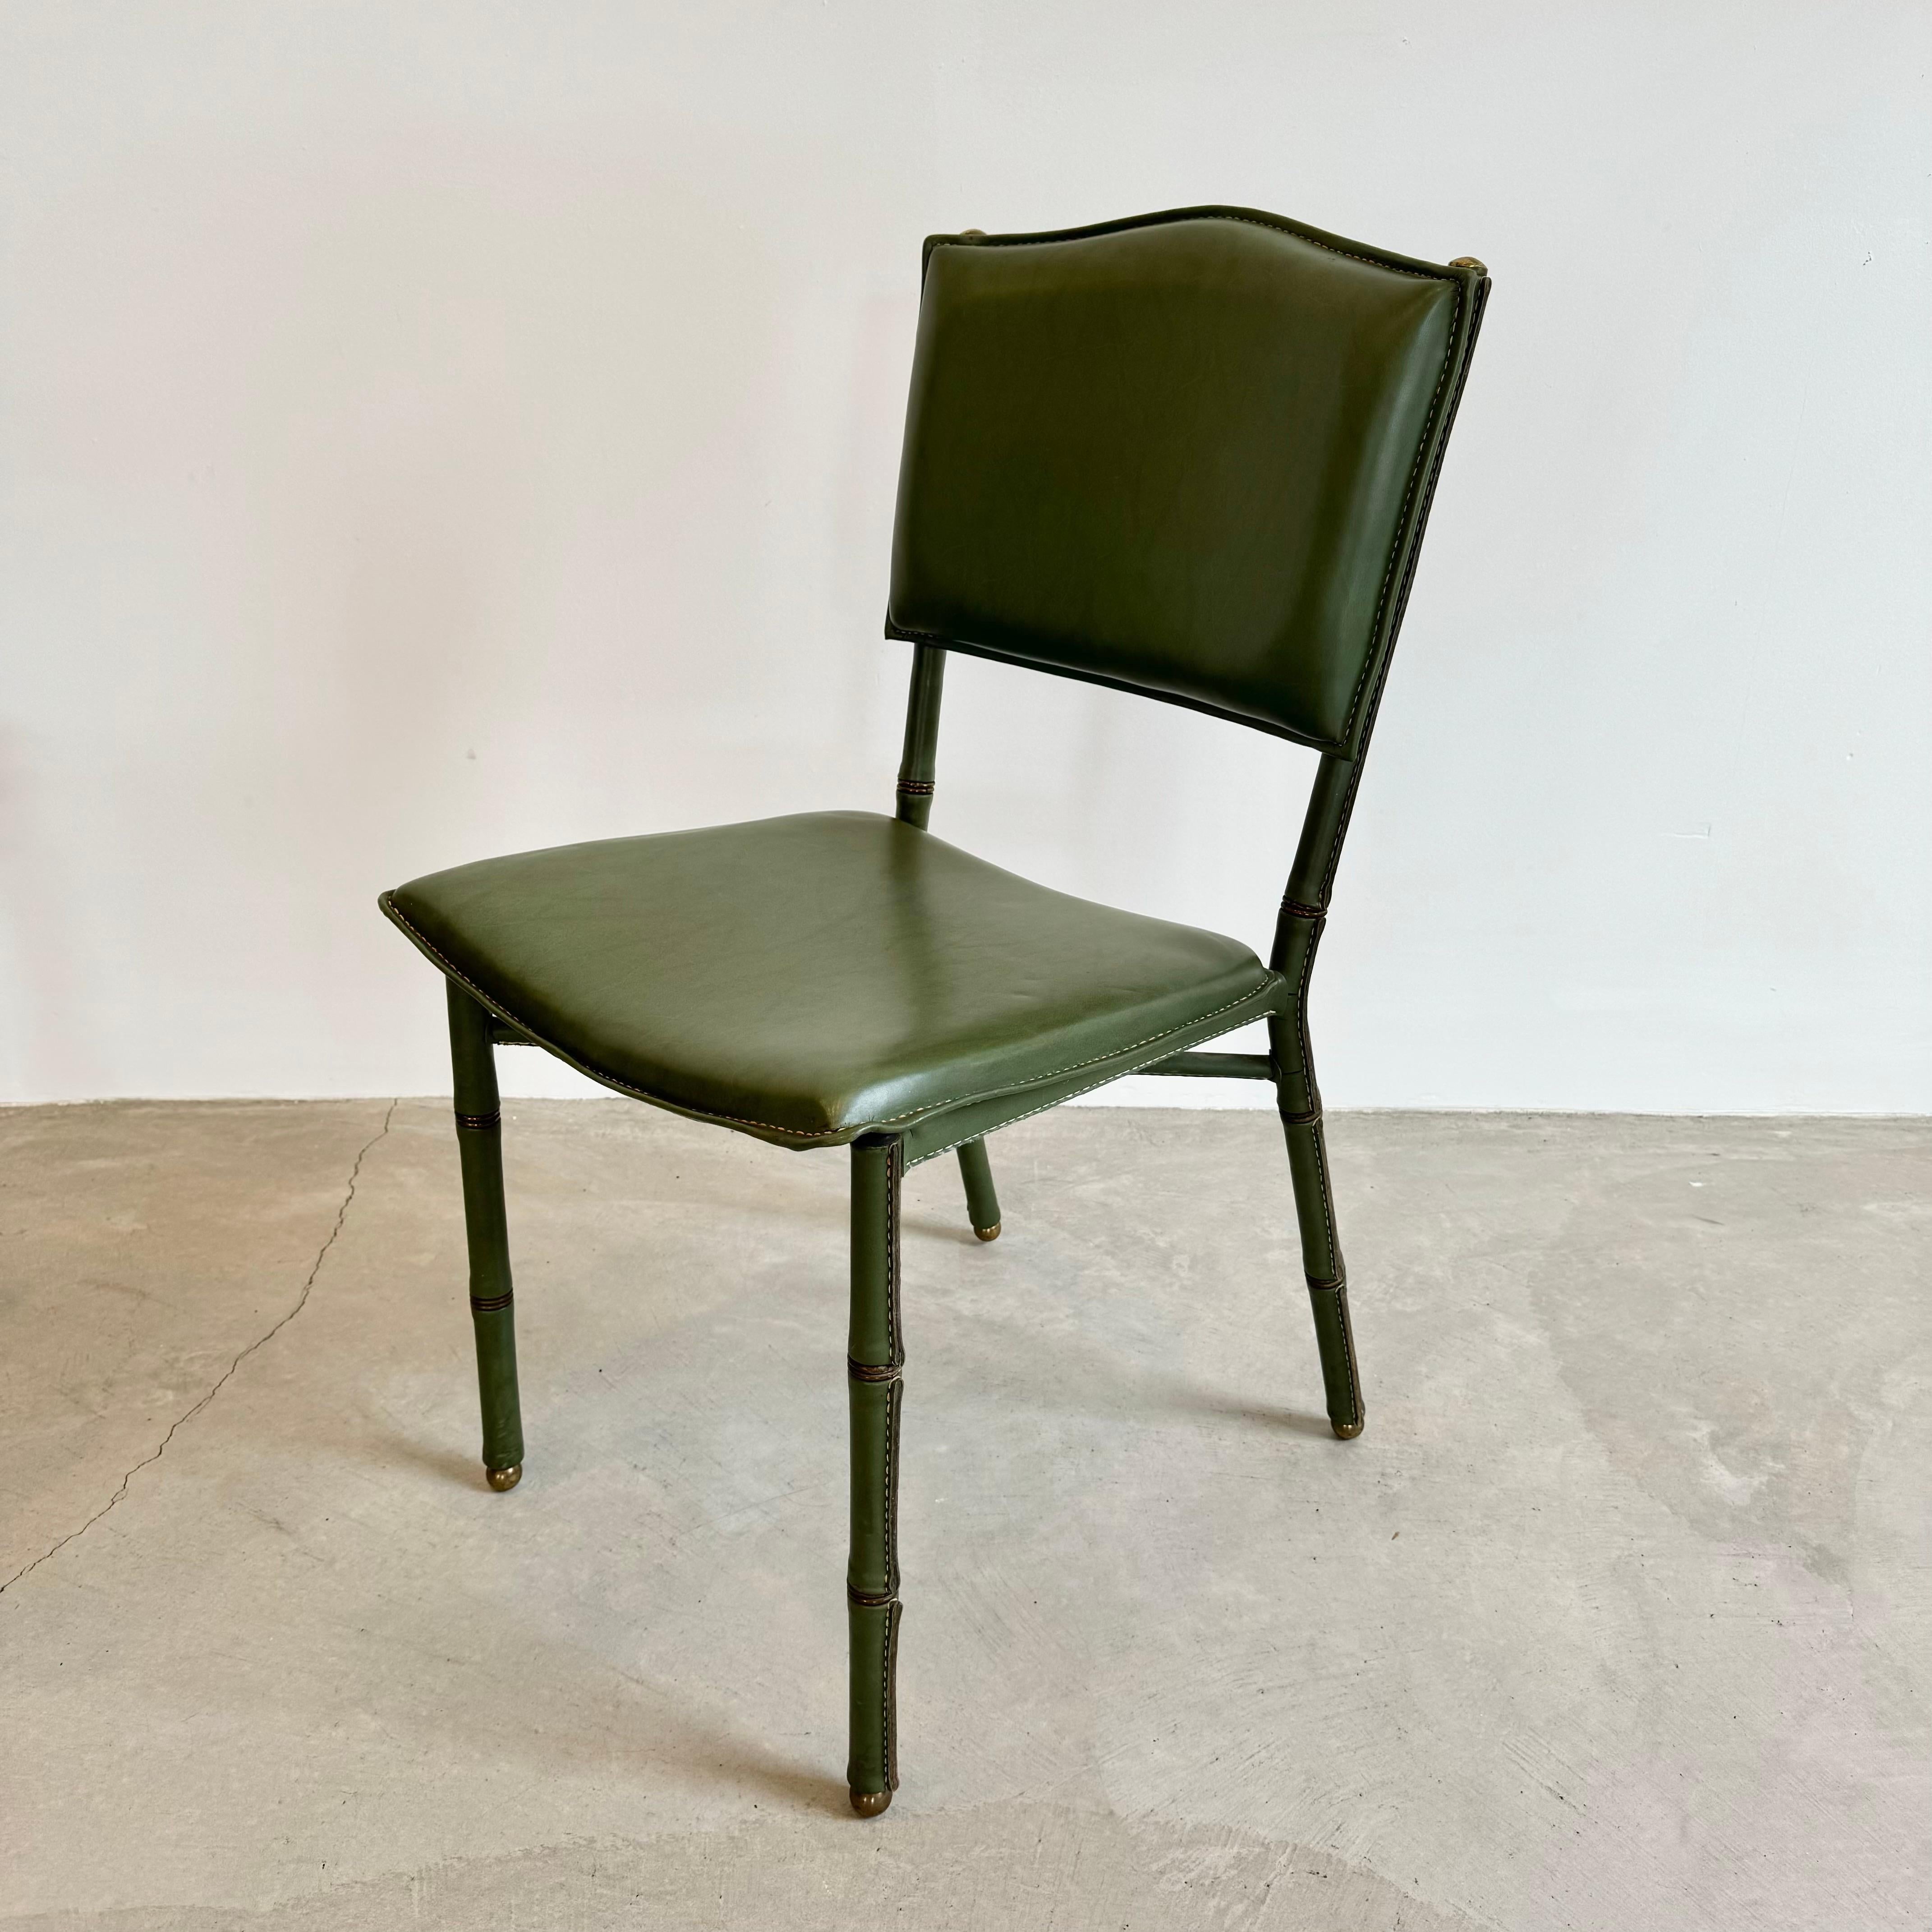 Jacques Adnet Green Leather Chairs, Circa 1950s, France For Sale 6